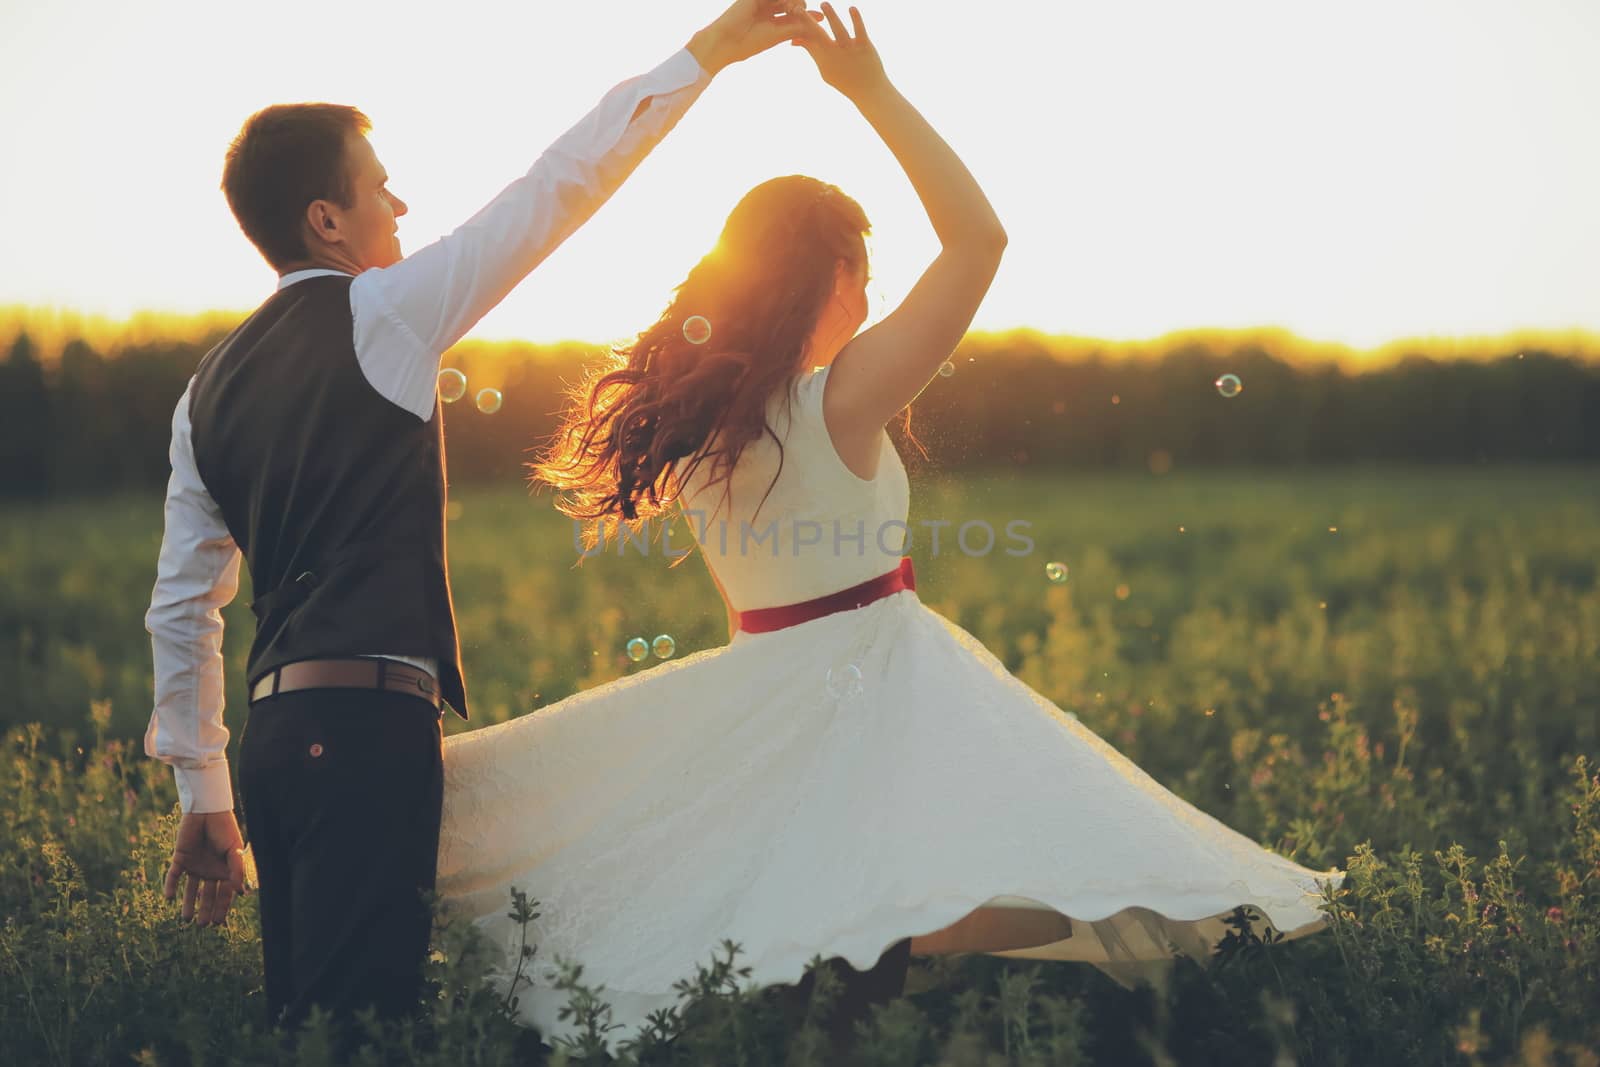 The bride and groom hold hands dancing in the park. Sunset light. Soap bubbles. Wedding. Happy family concept. High quality photo